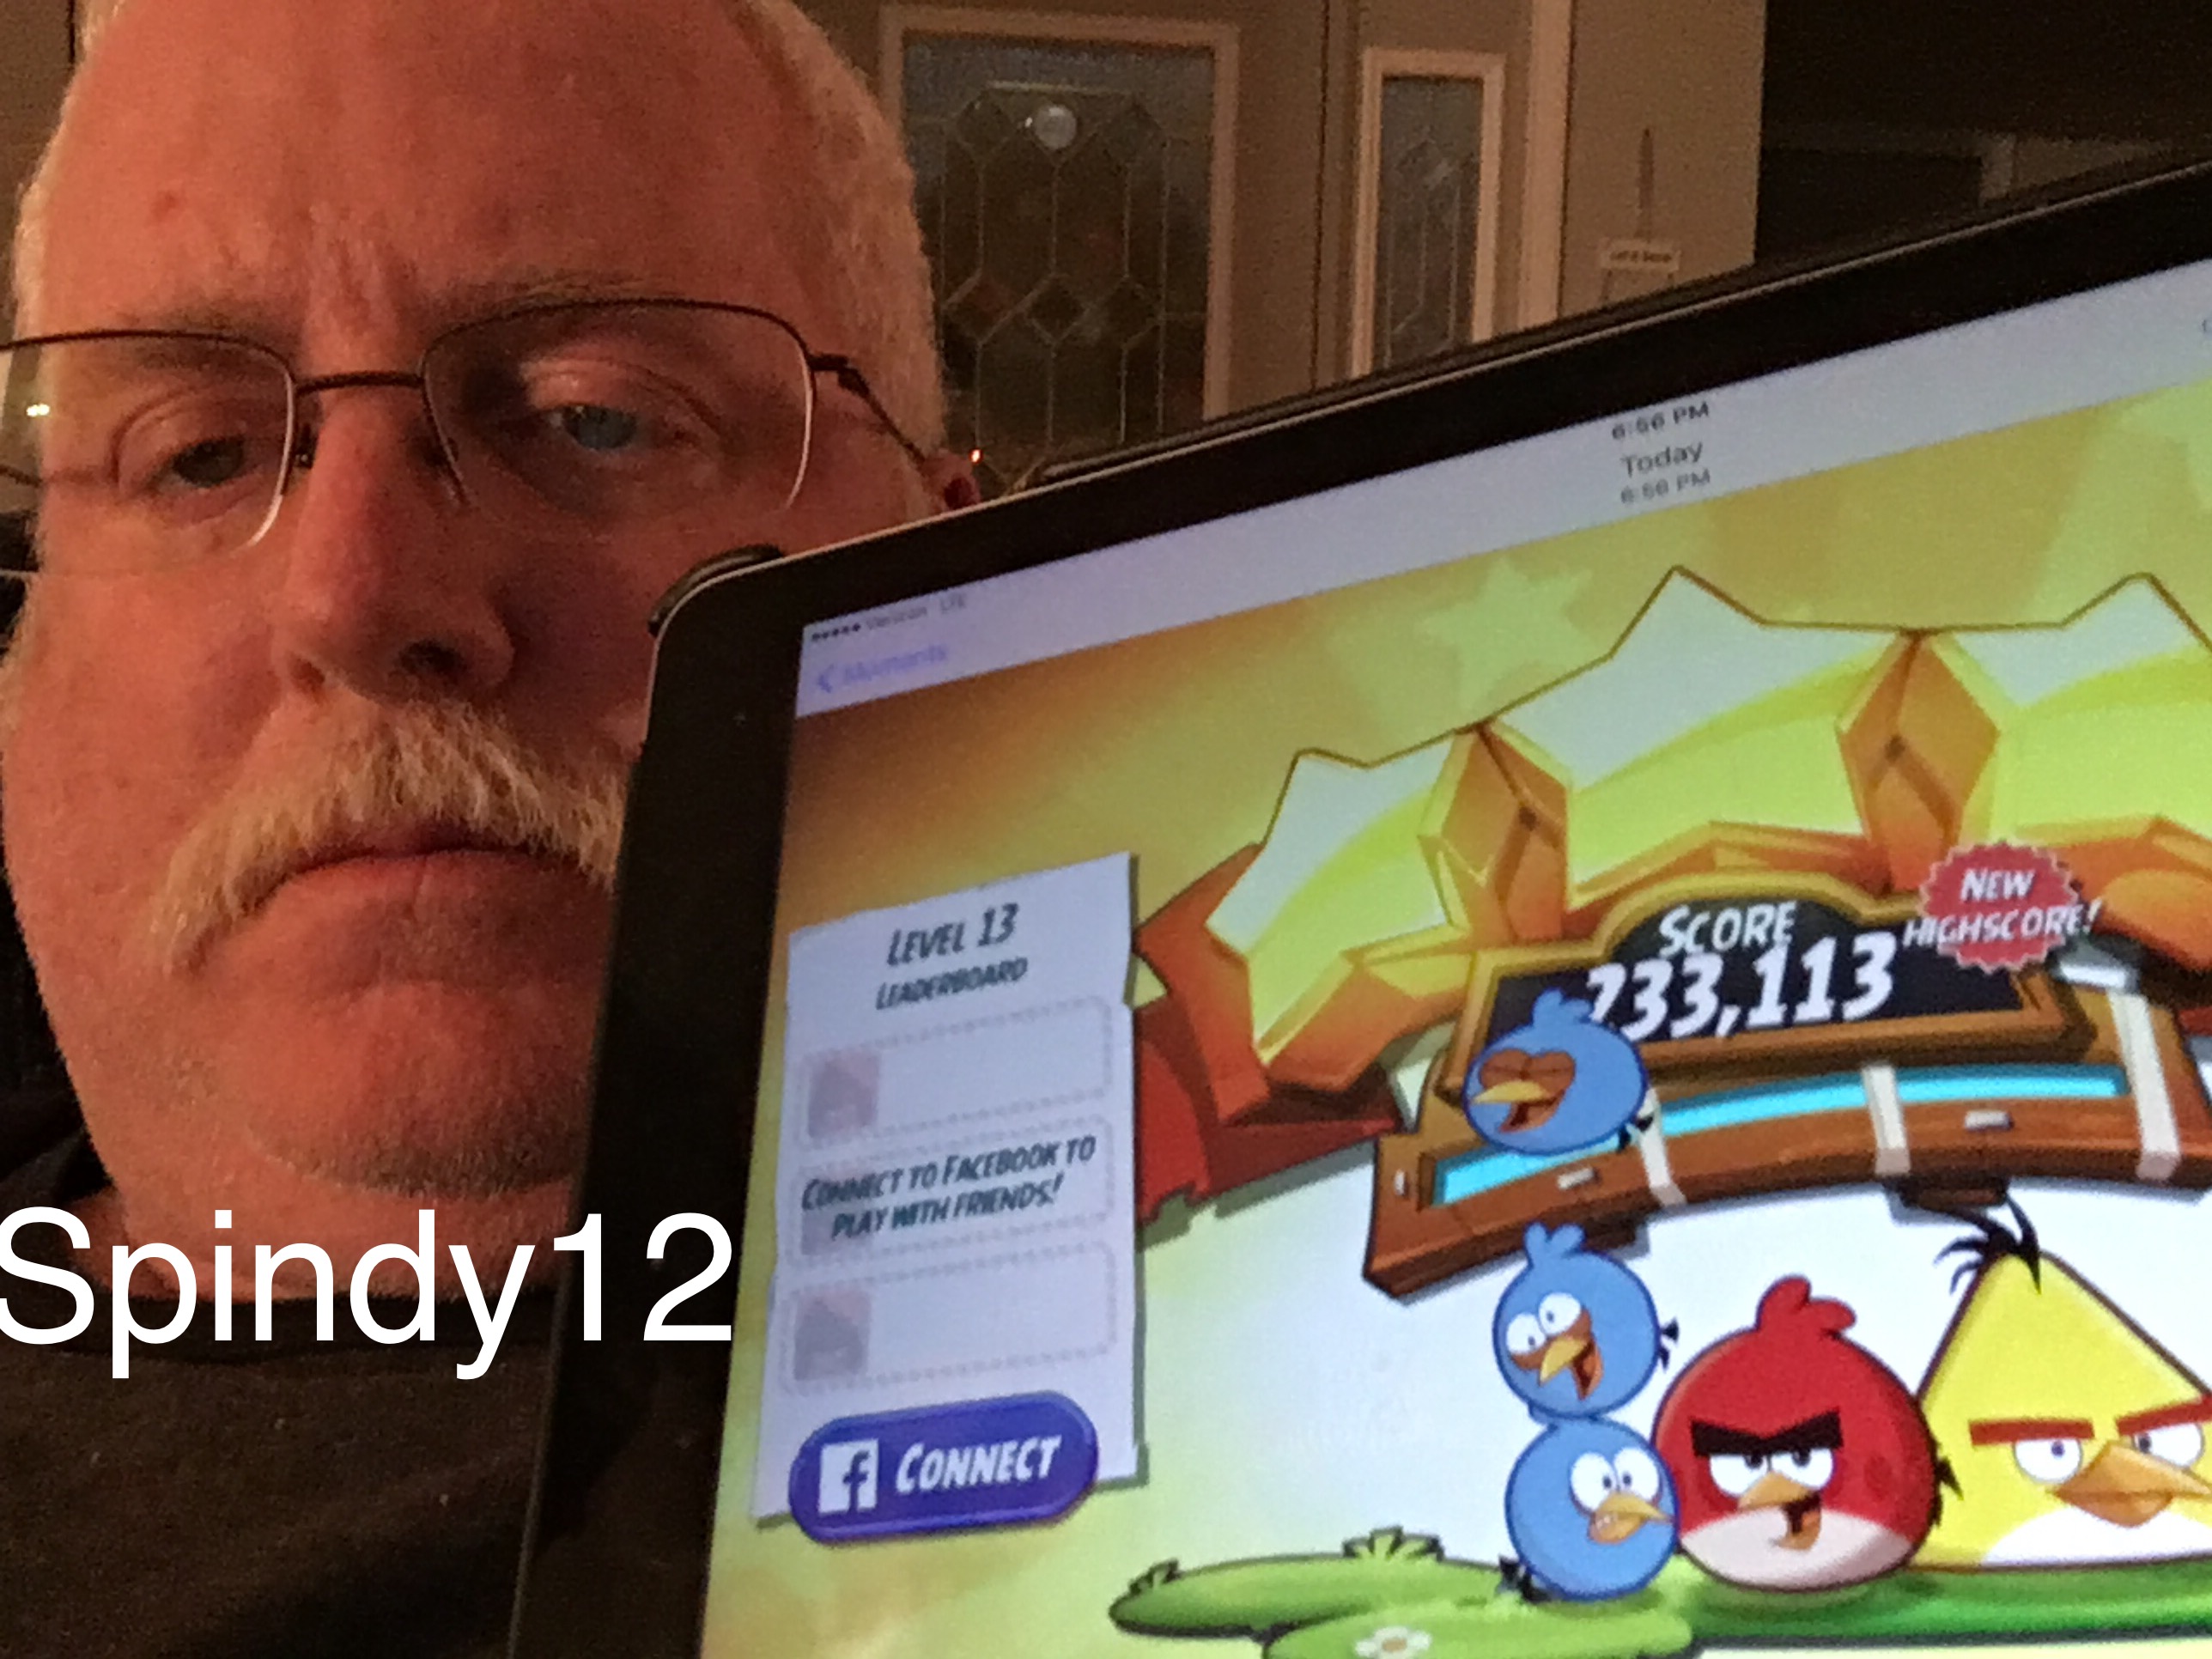 Spindy12: Angry Birds 2: Level 13 (iOS) 233,113 points on 2016-12-20 19:28:28